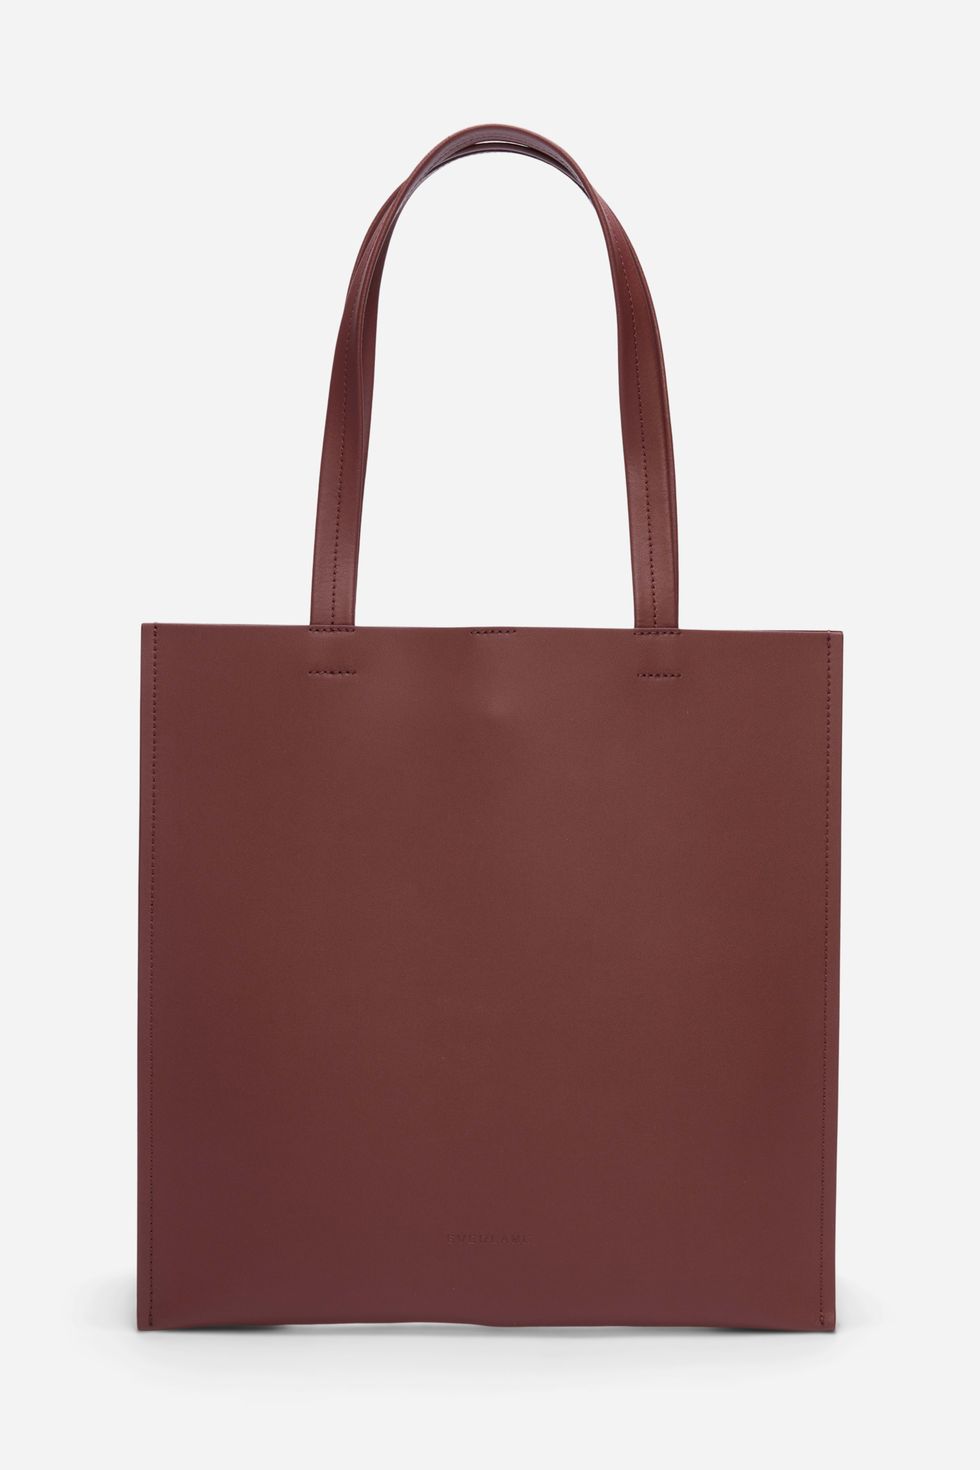 Everlane The Gallery Tote